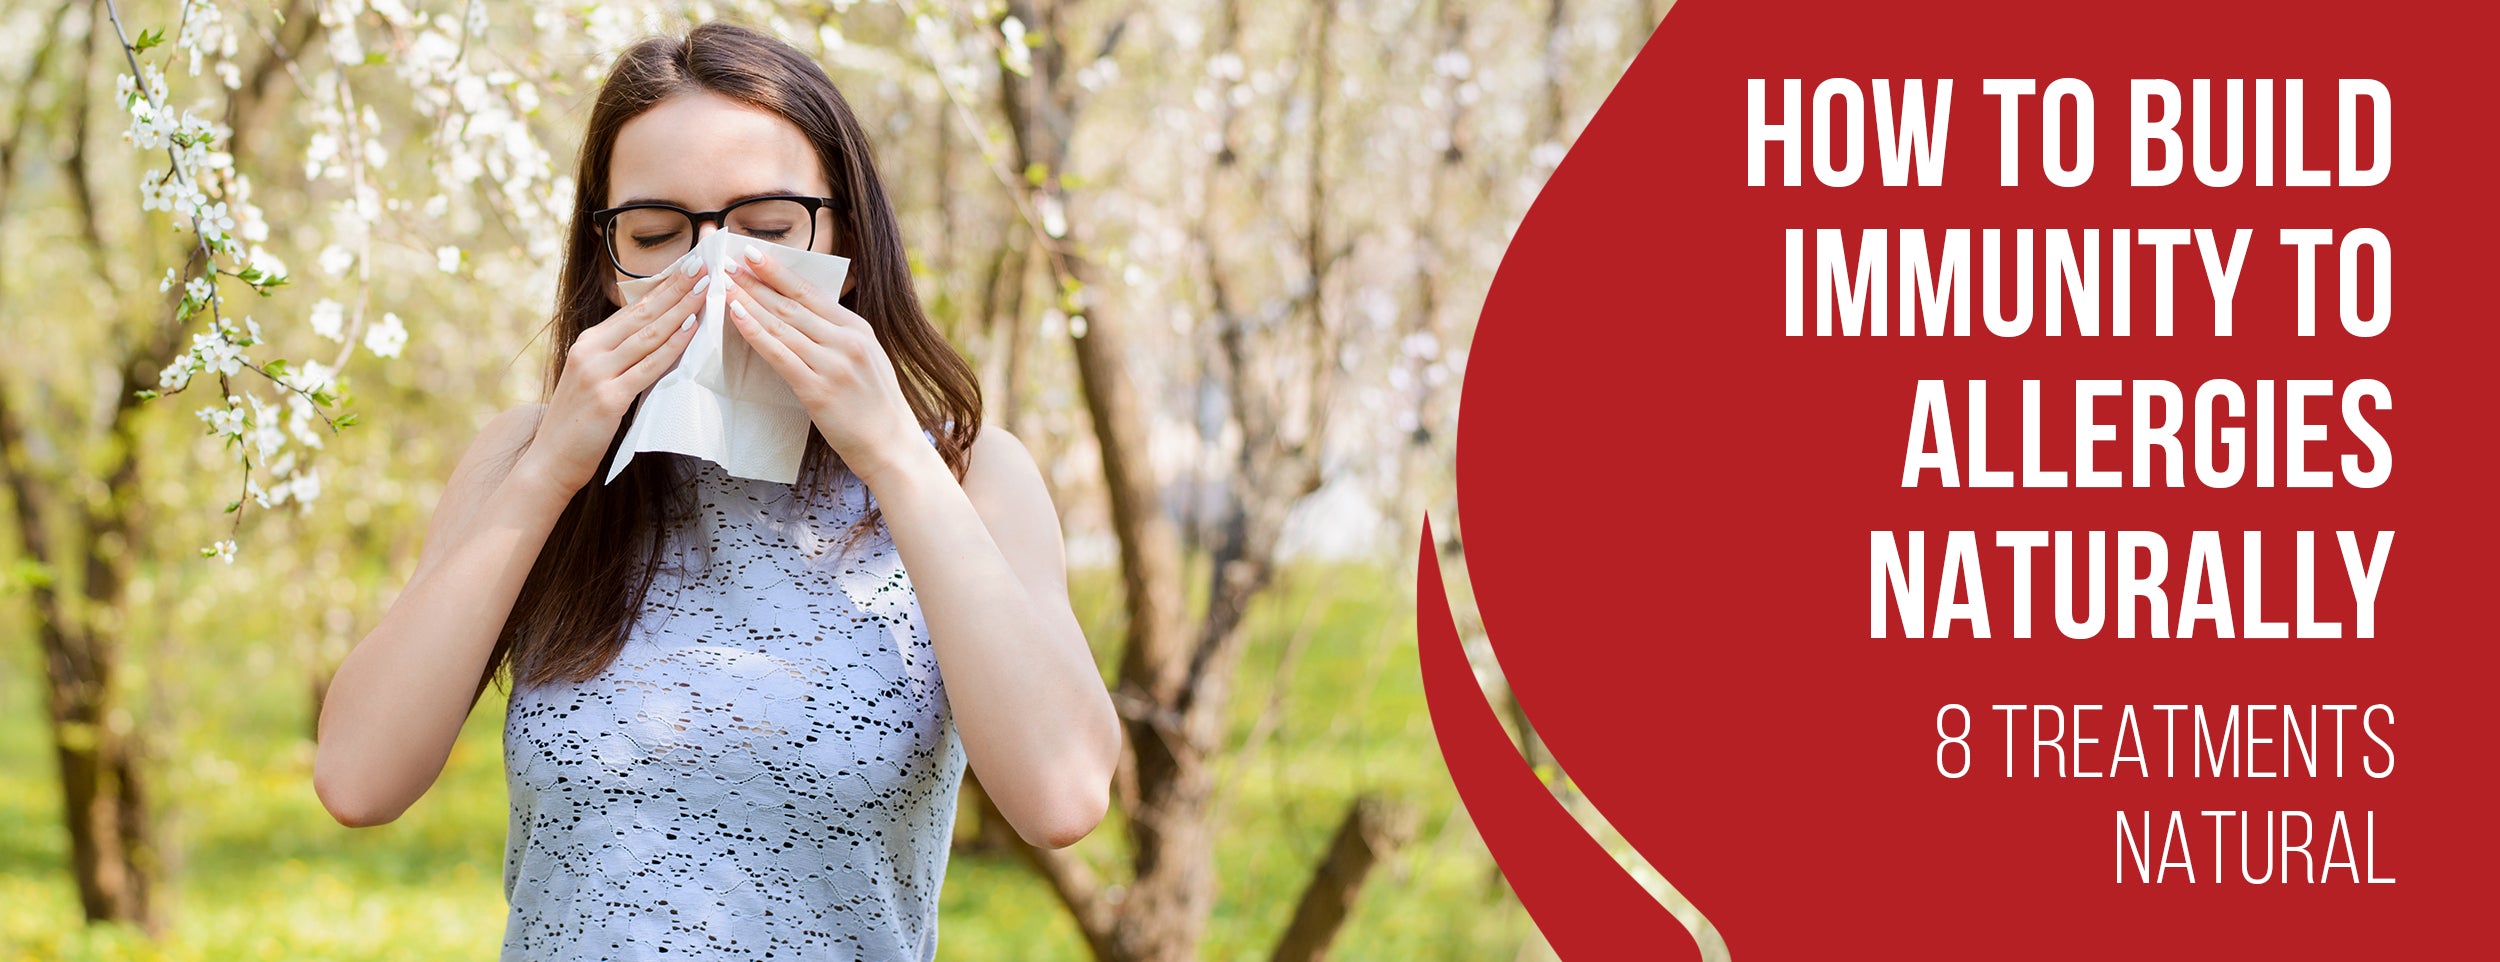 8 Best Ways & Other 4 Remedies to Build Immunity to Allergies